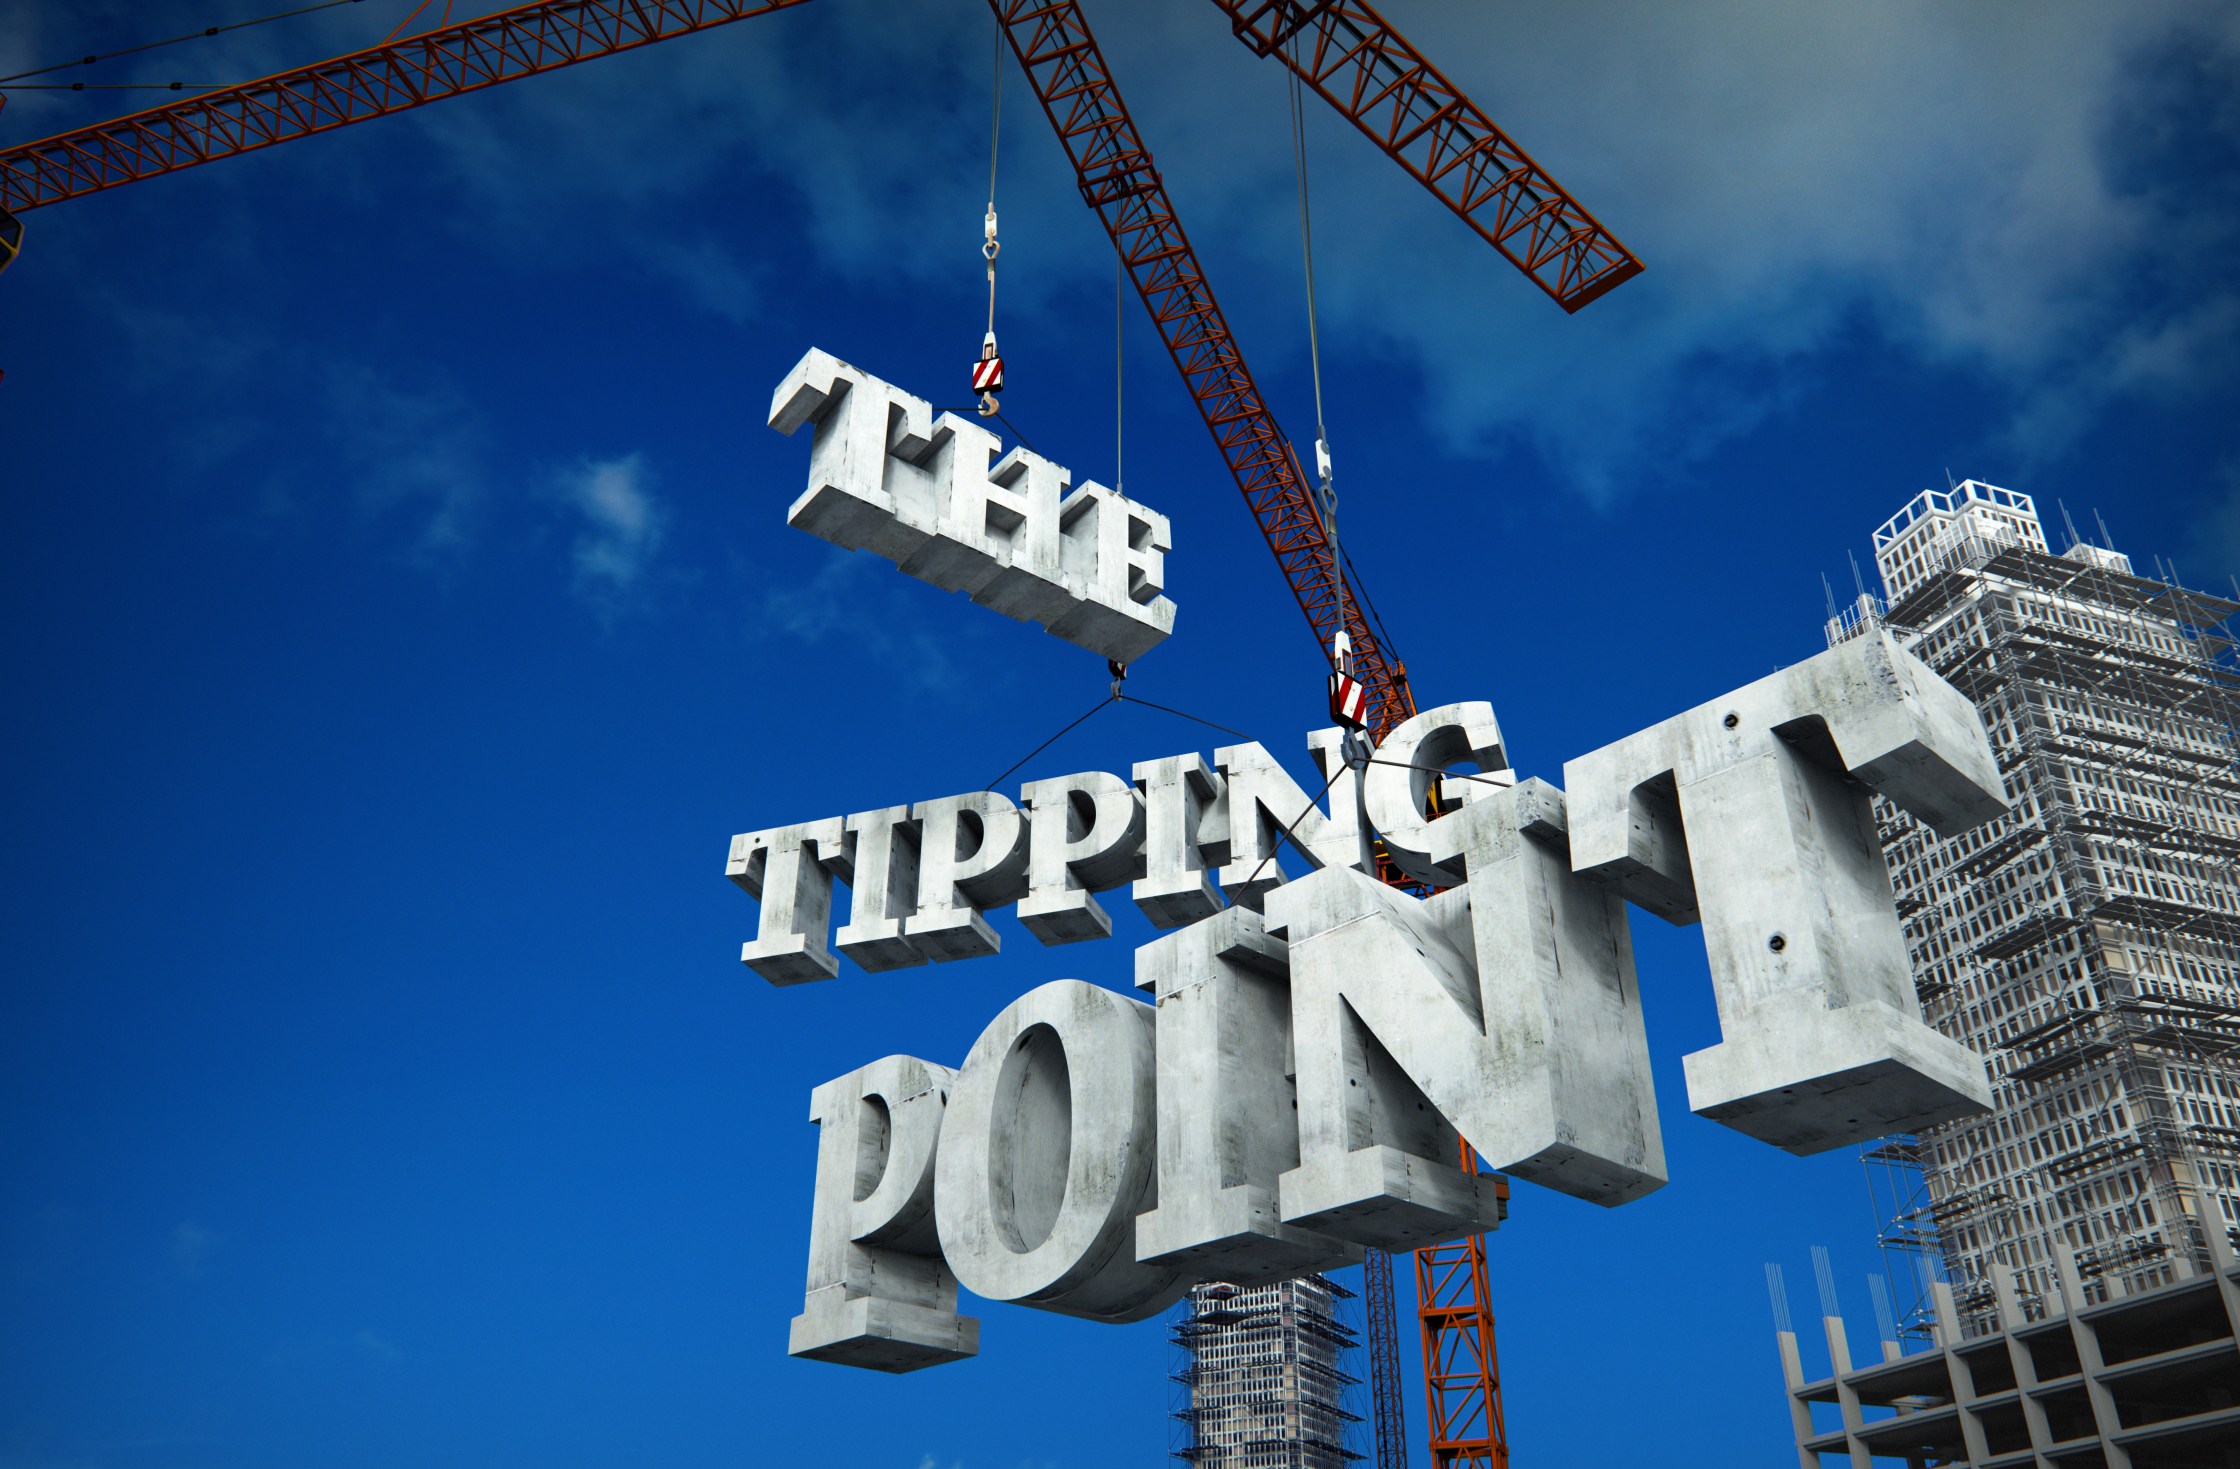 The Tipping Point 3D Type Cranes Building Construction Inside Housing Magazine